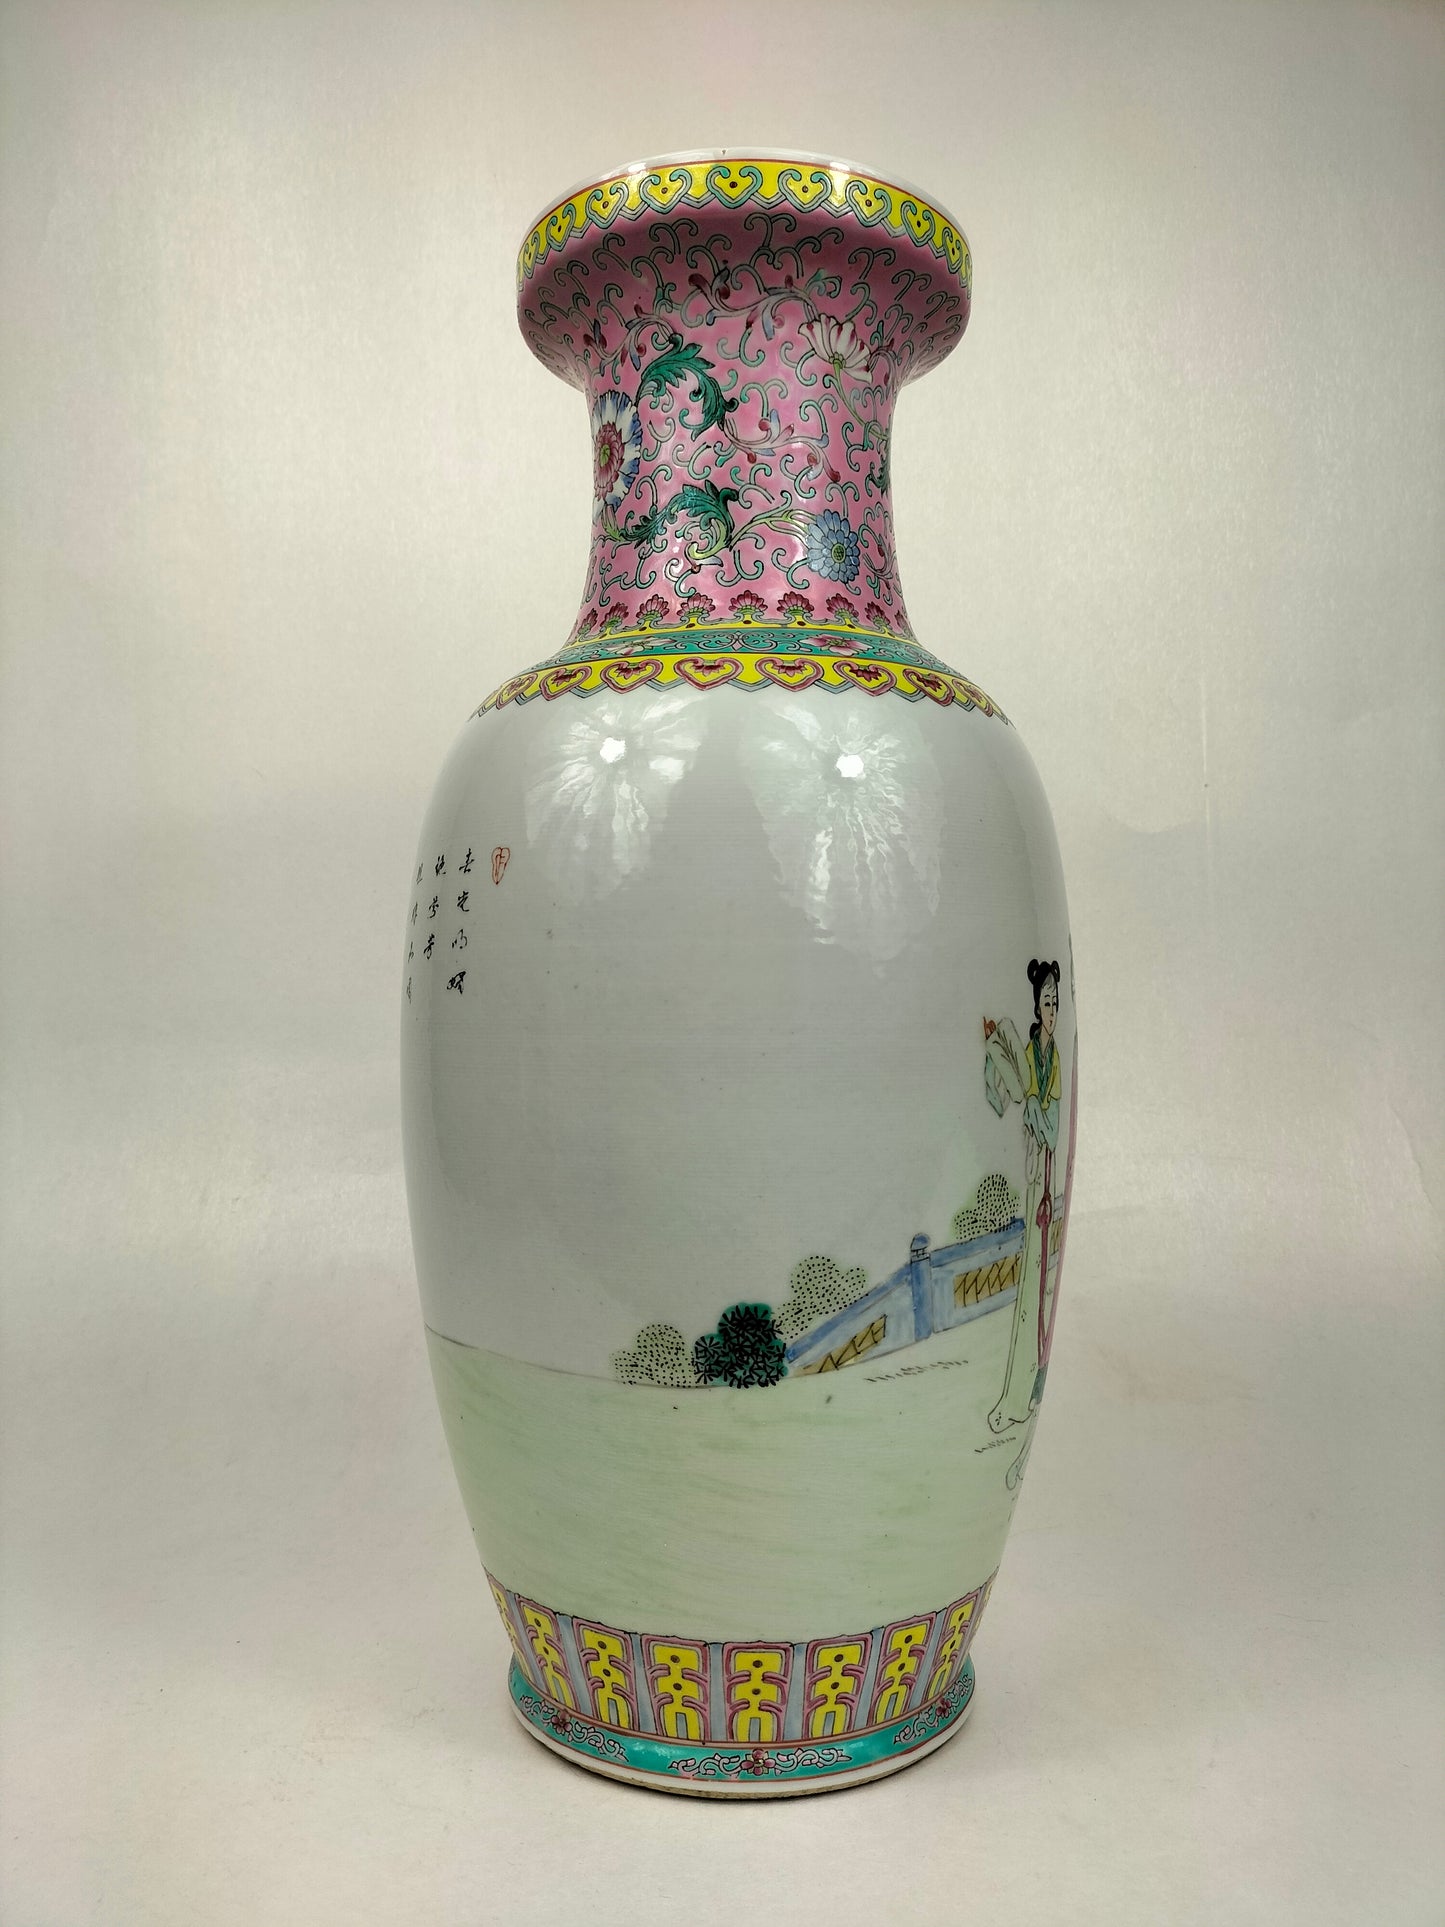 Chinese famille rose vase decoated with a garden scene // Jingdezhen - 20th century